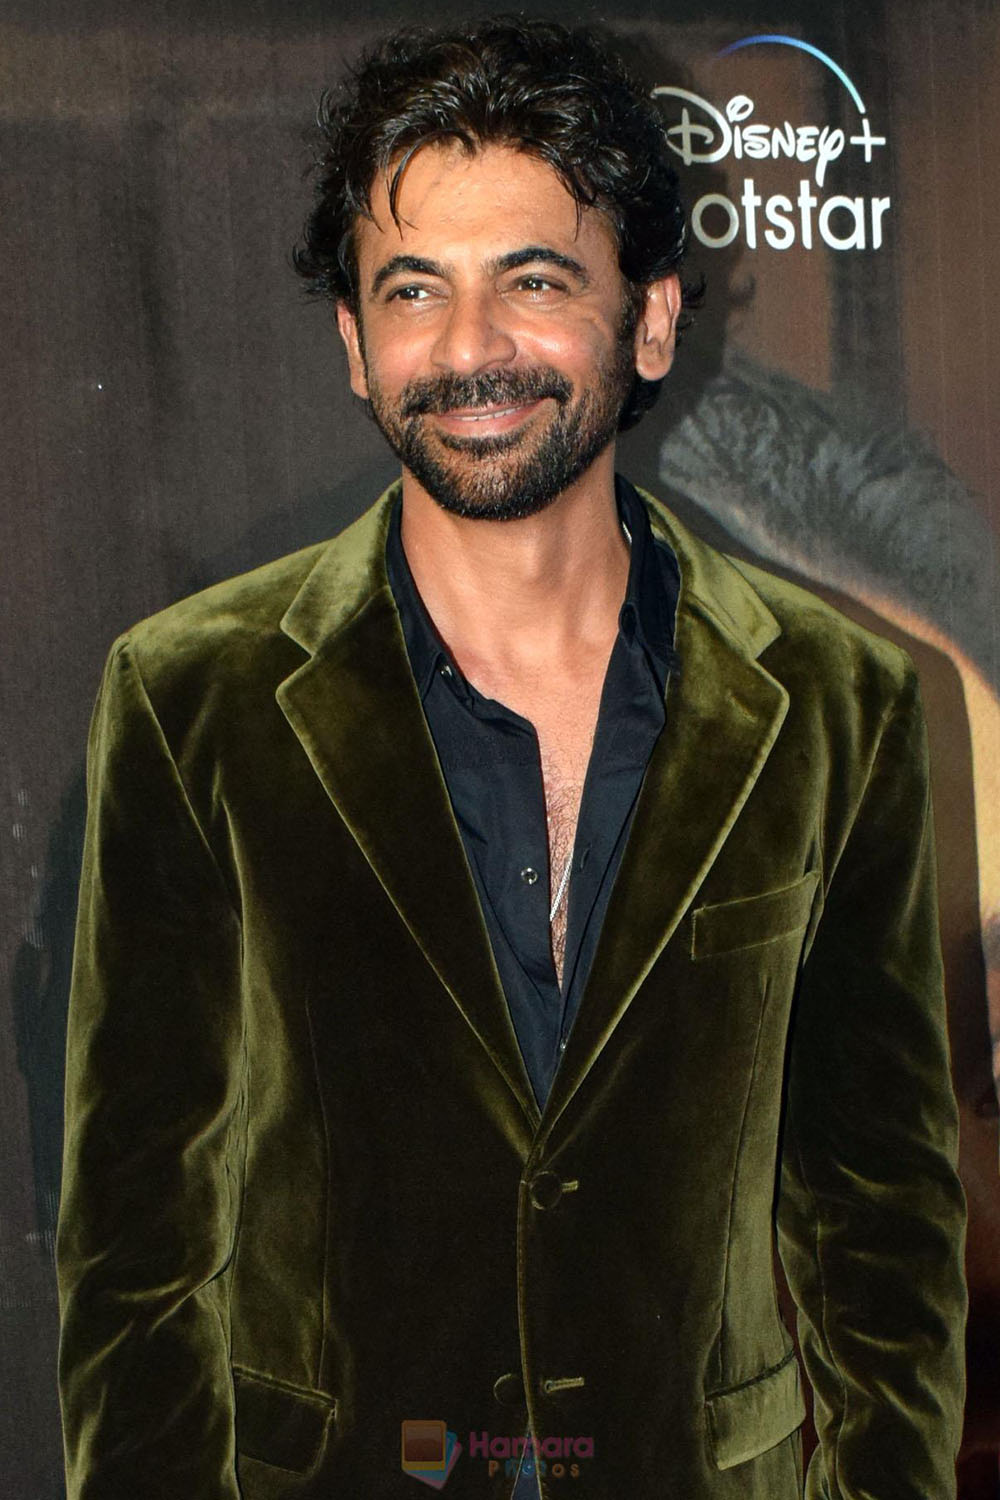 Sunil Grover at the premiere of Aakhri Sach series